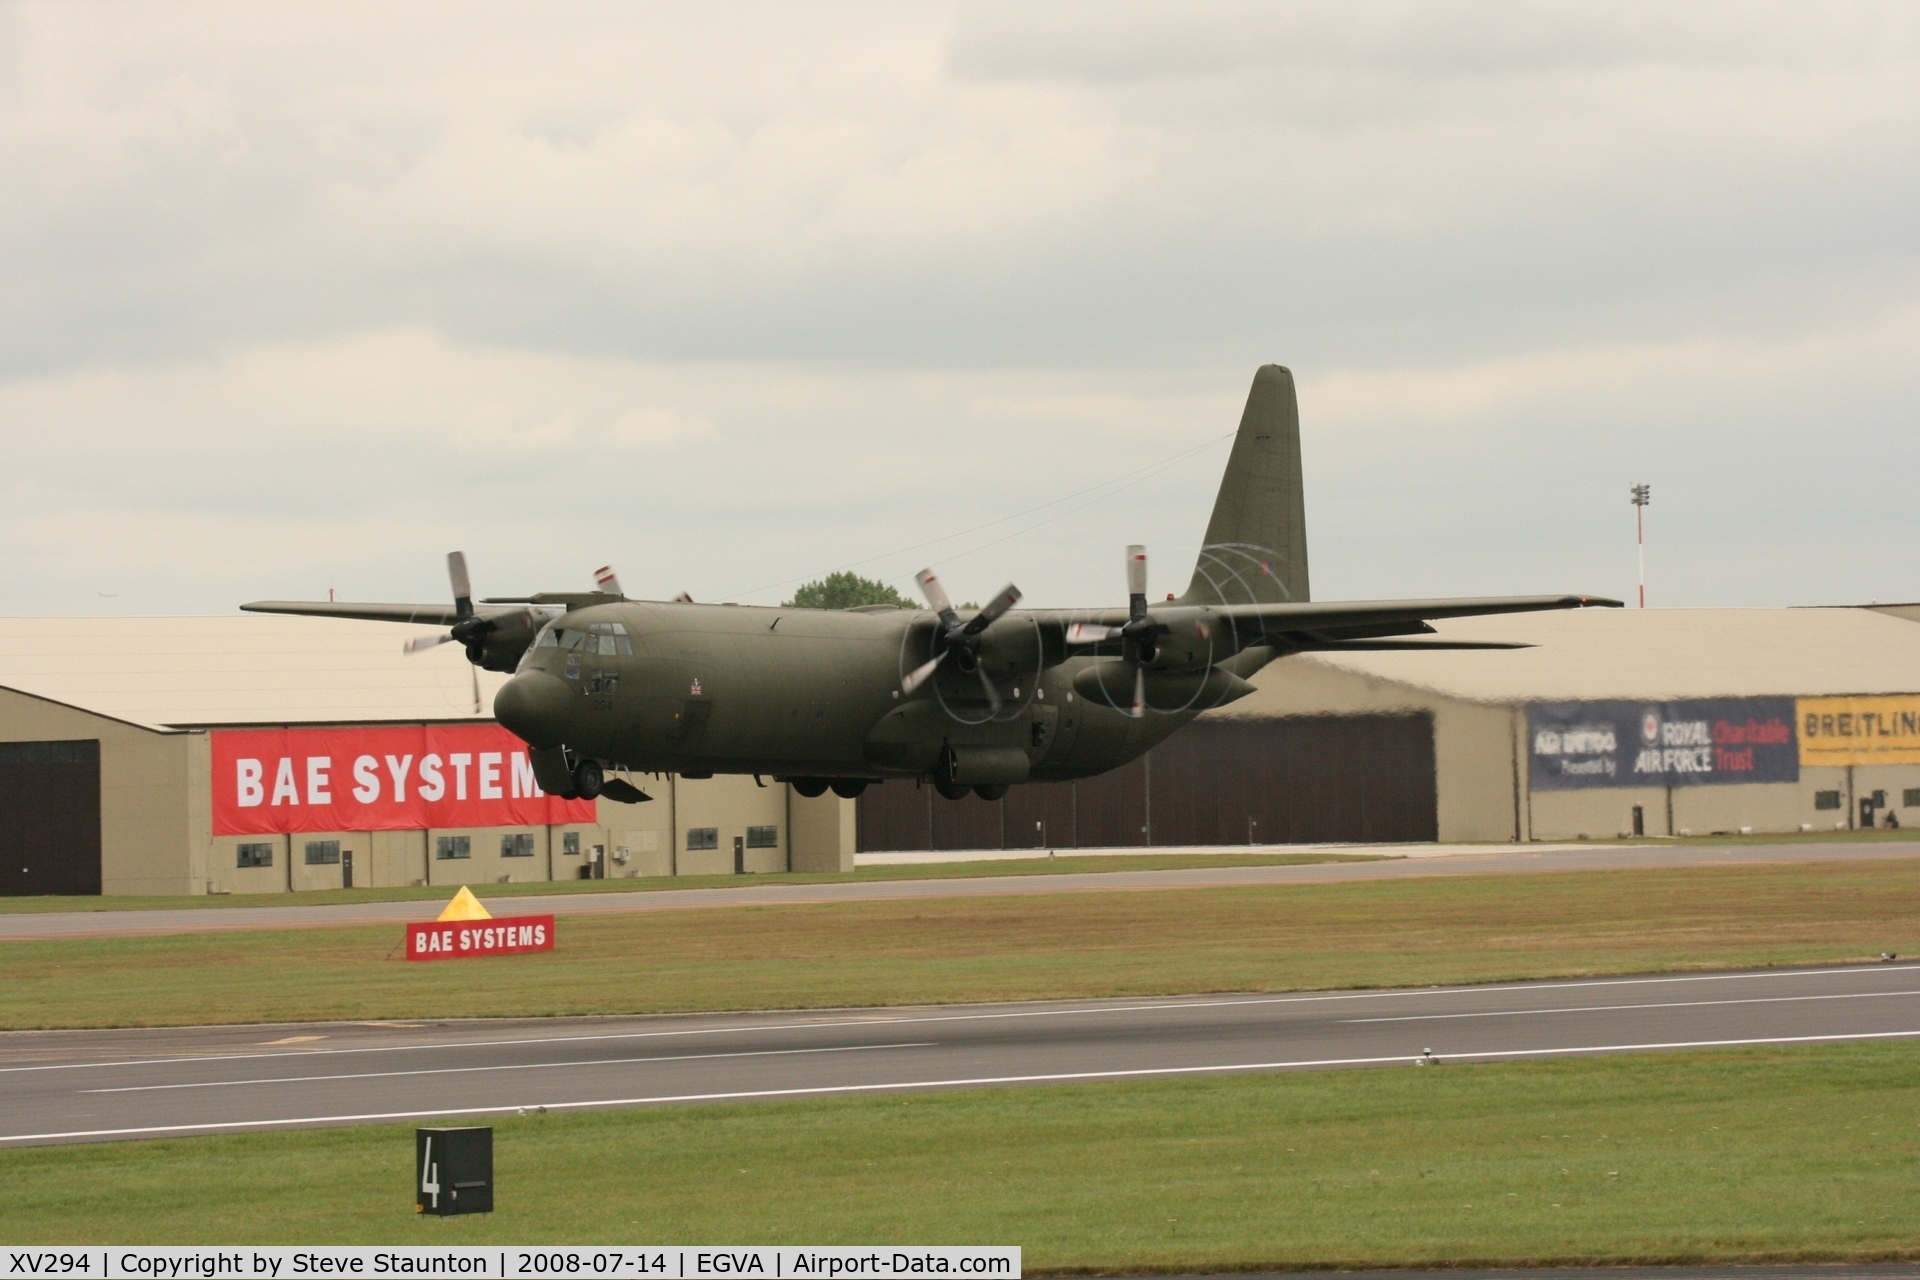 XV294, 1966 Lockheed C-130K Hercules C.3 C/N 382-4259, Taken at the Royal International Air Tattoo 2008 during arrivals and departures (show days cancelled due to bad weather)